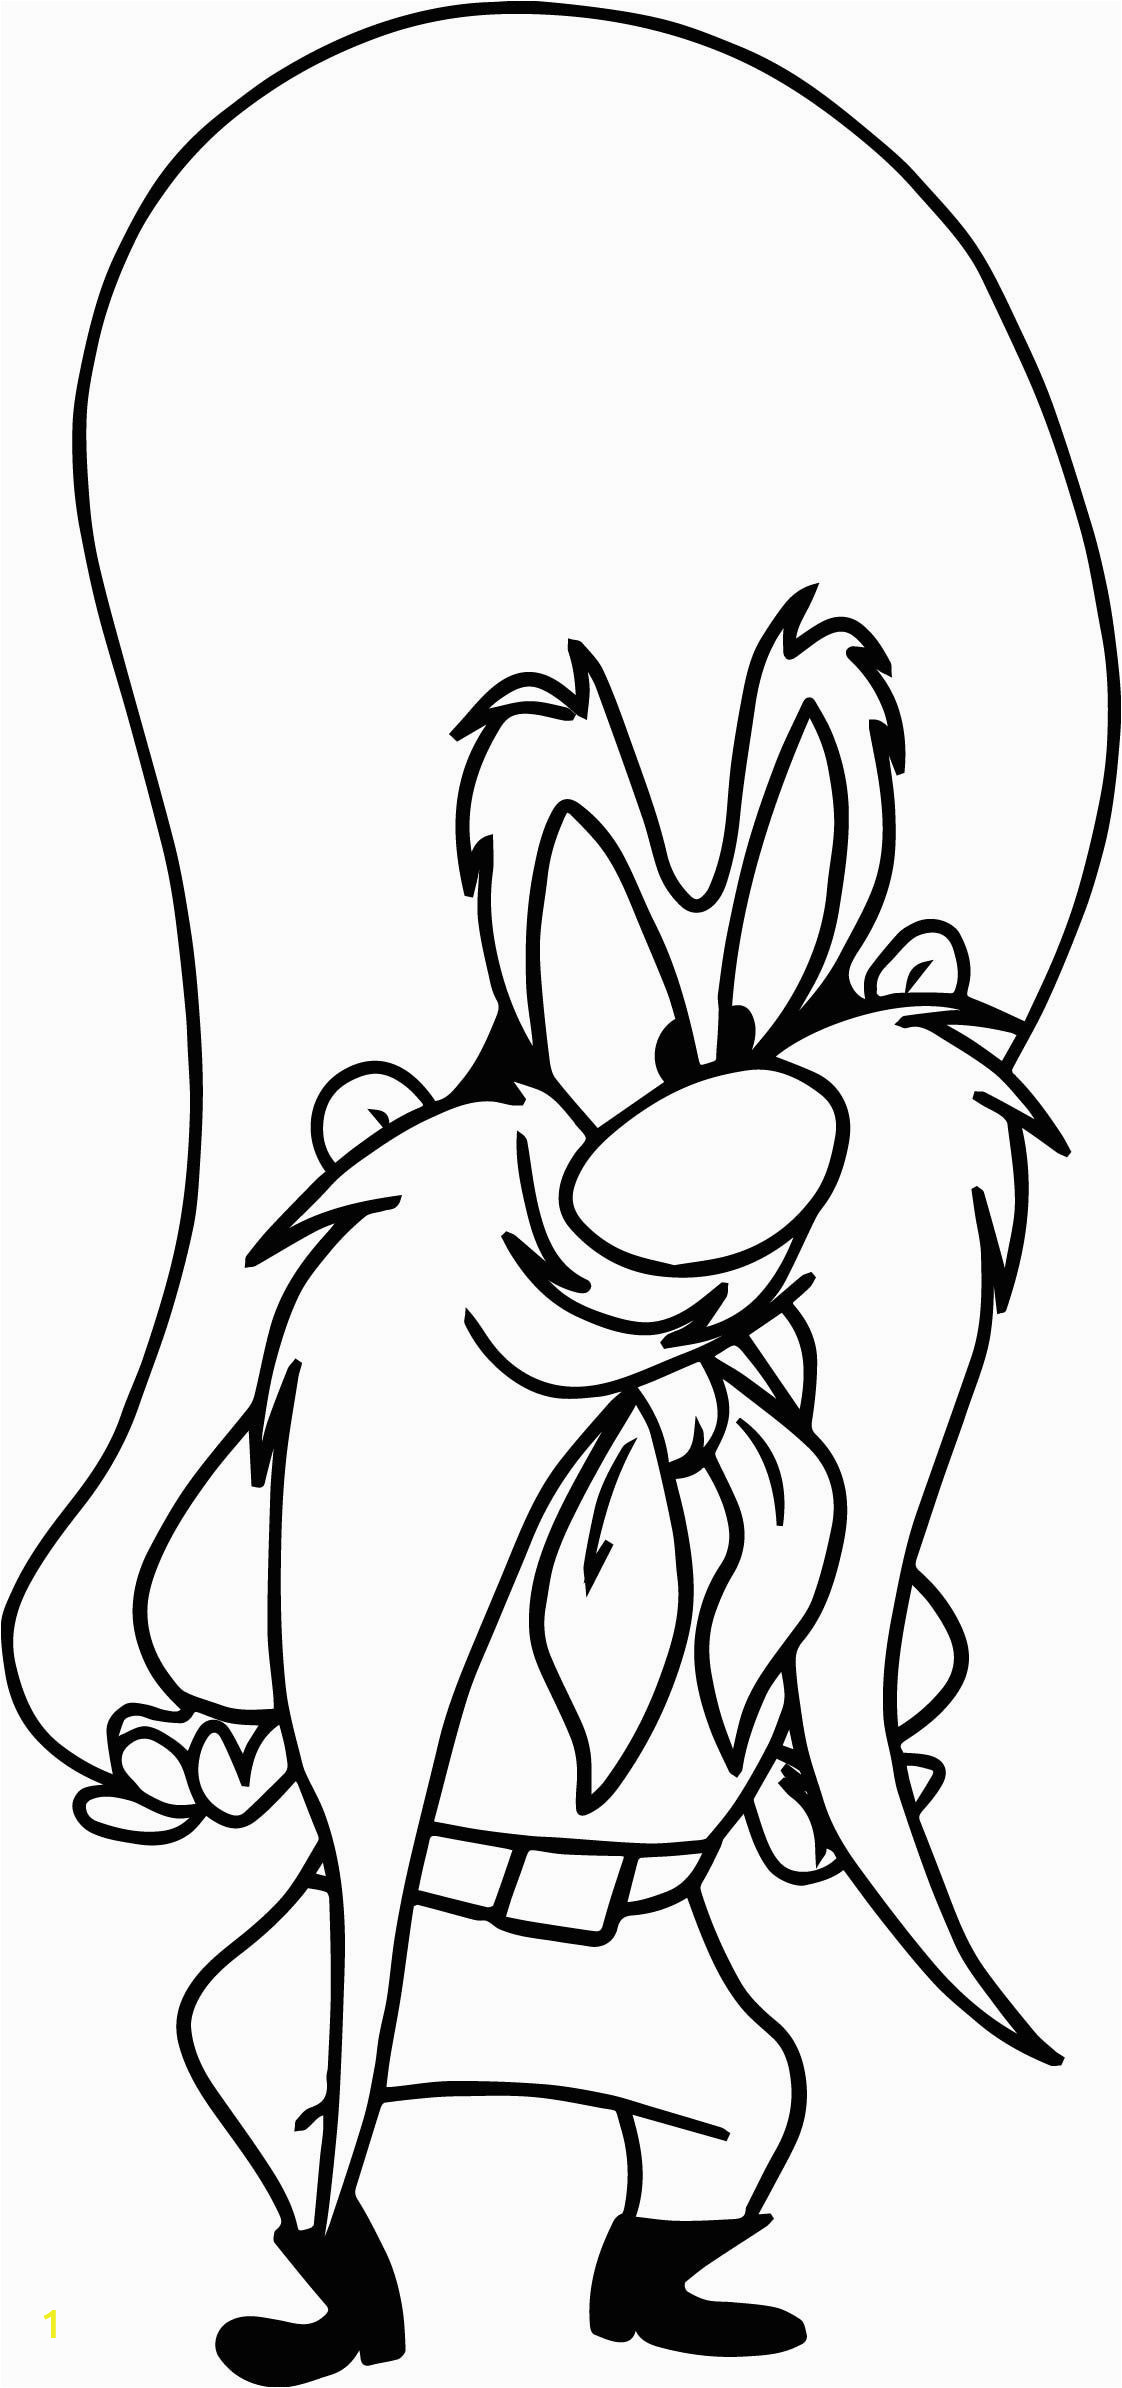 Free Printable Looney Tunes Coloring Pages Awesome Yosemite Sam Looney Tunes Looney Tunes Coloring